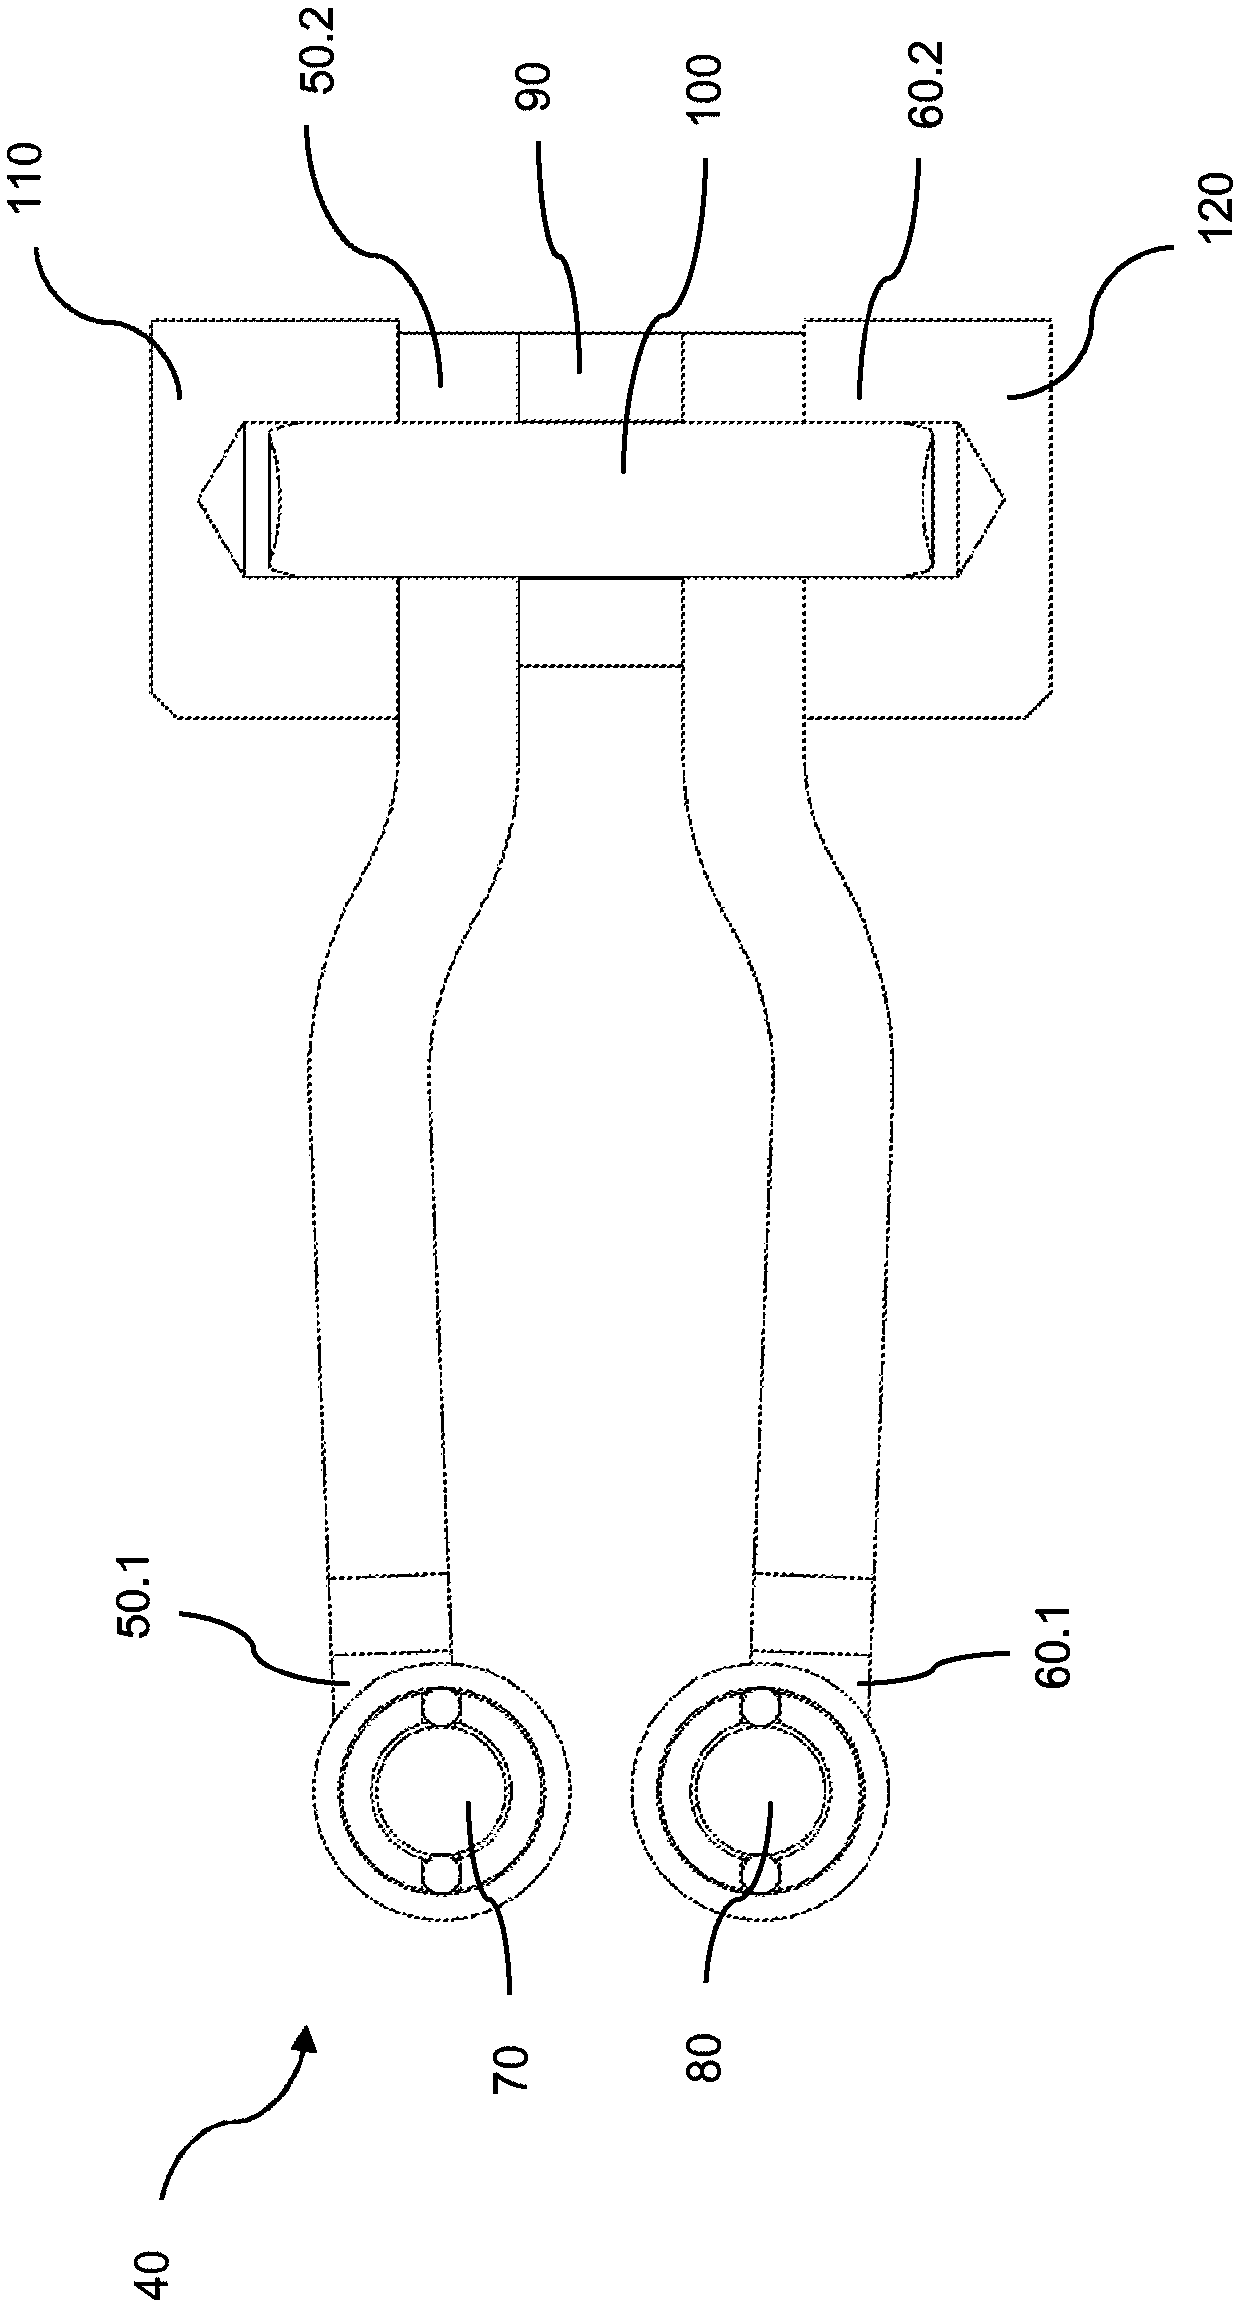 Device for simulating a force on an actuation element of a vehicle, in particular a pedal force simulator